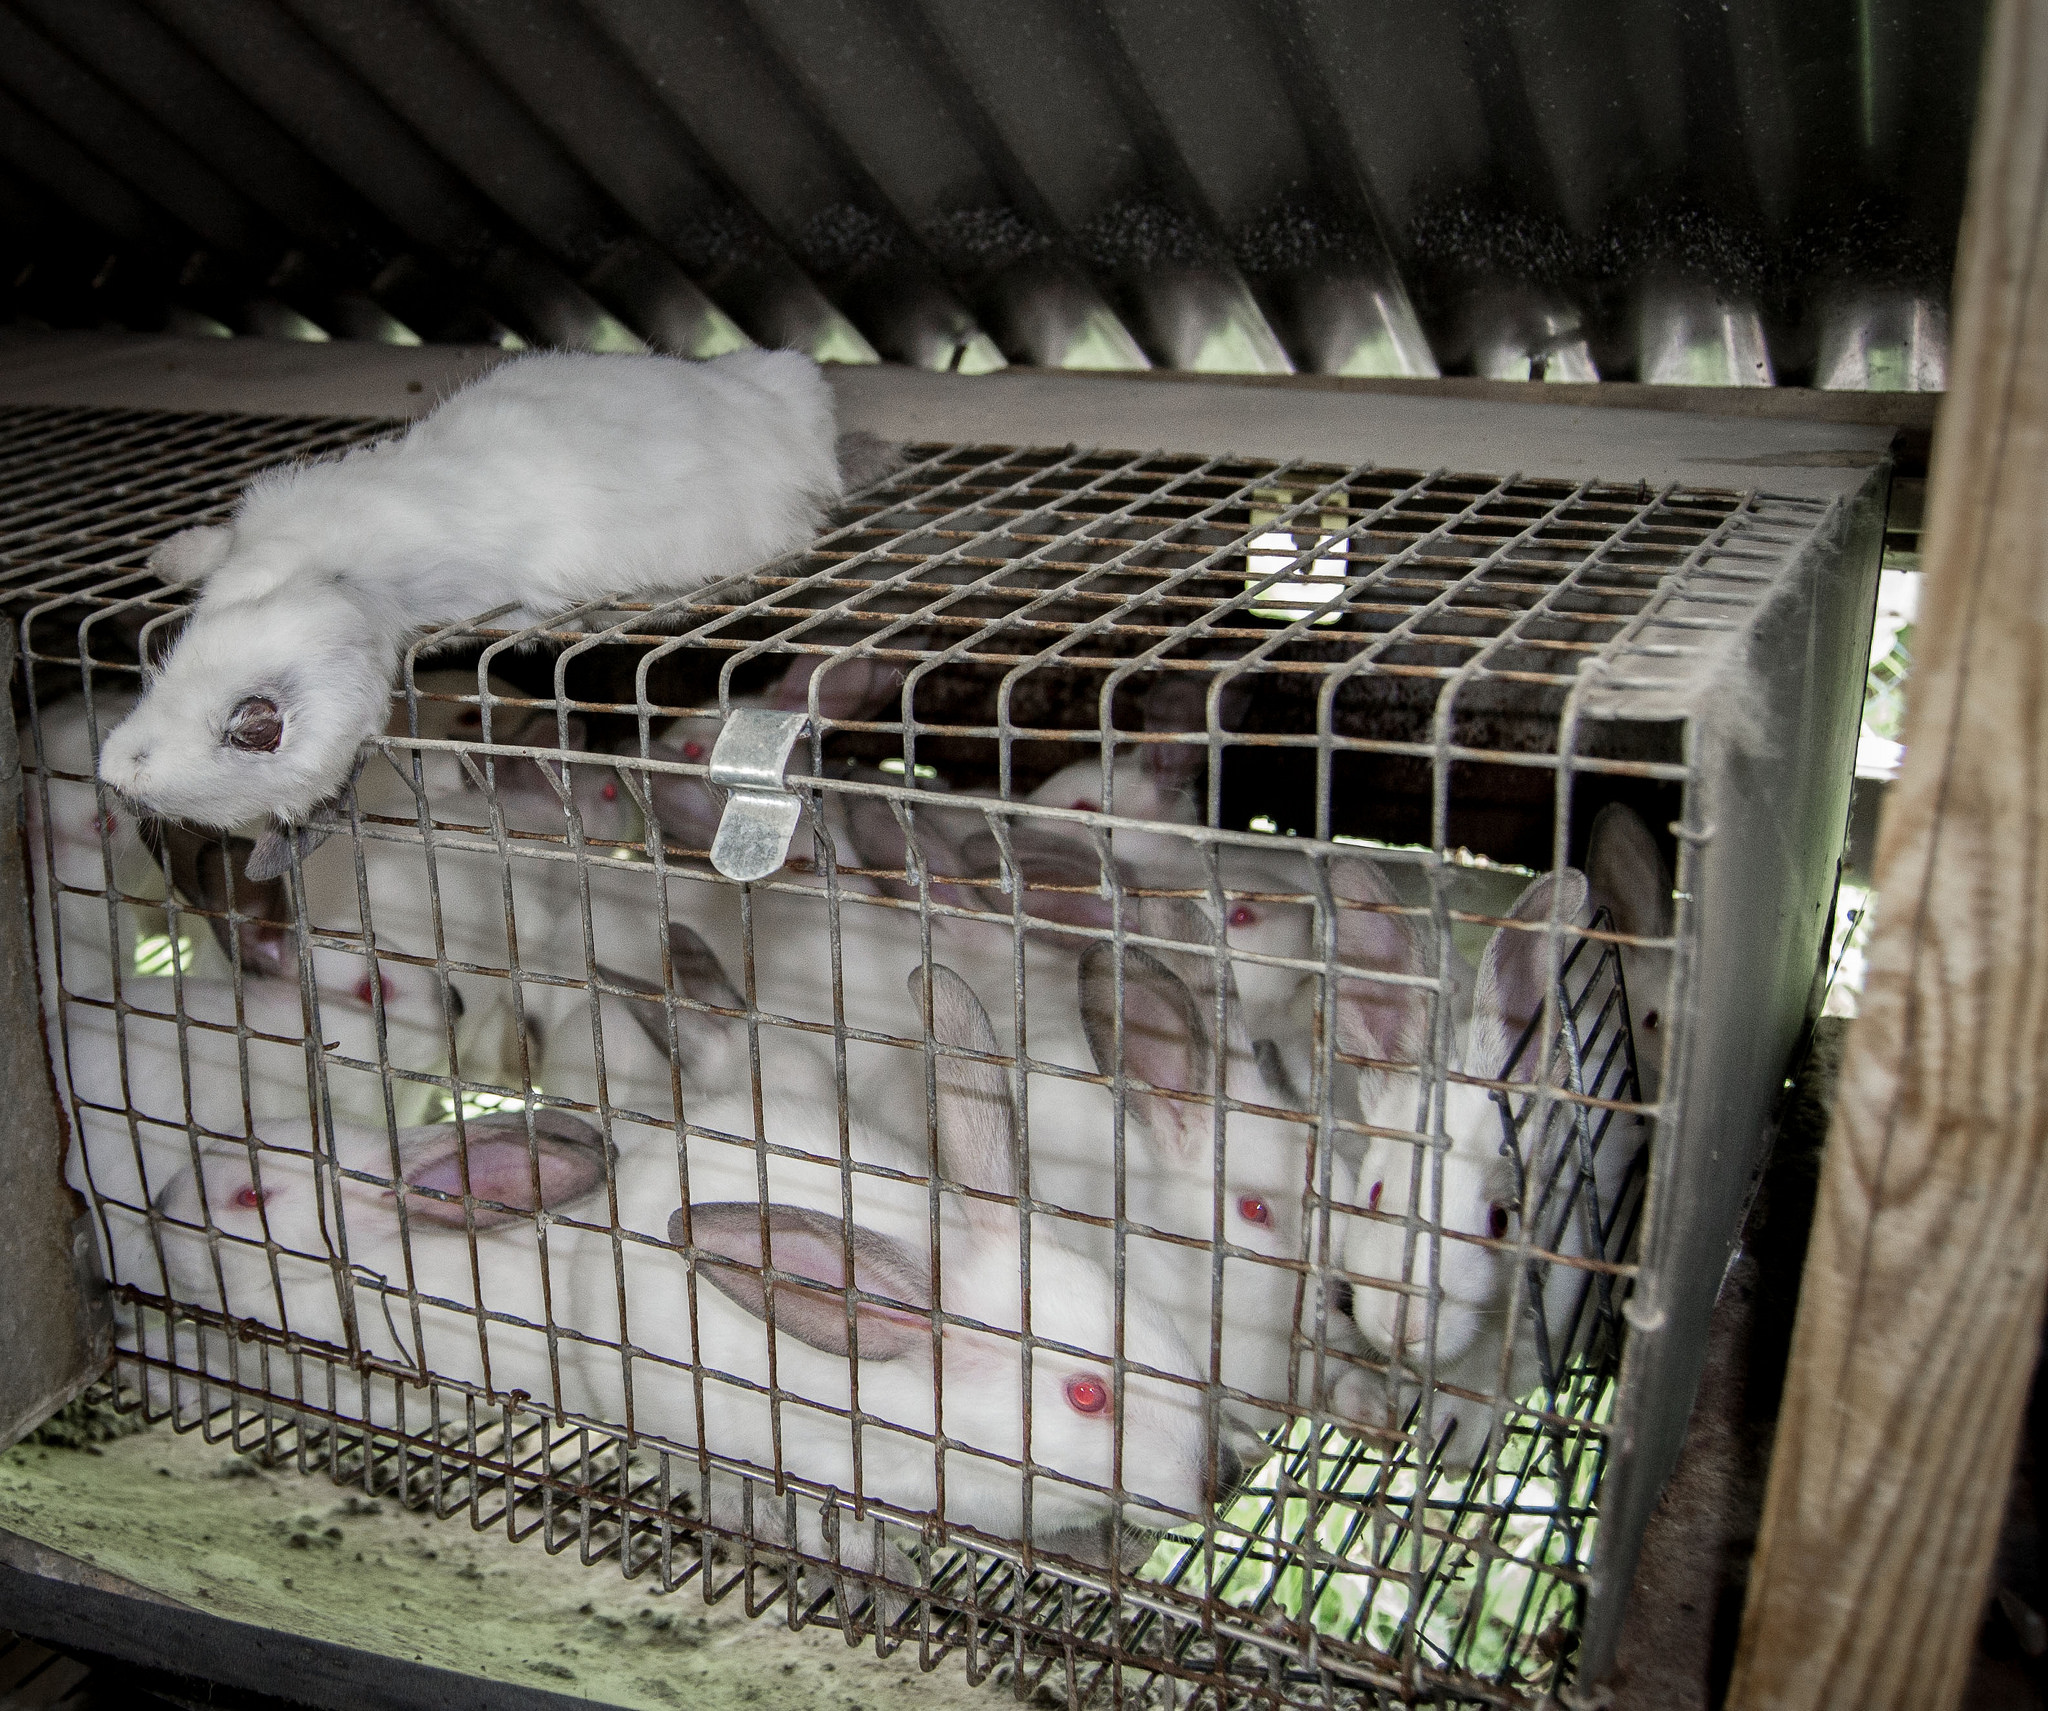 Rabbits kept in a cage and skinned